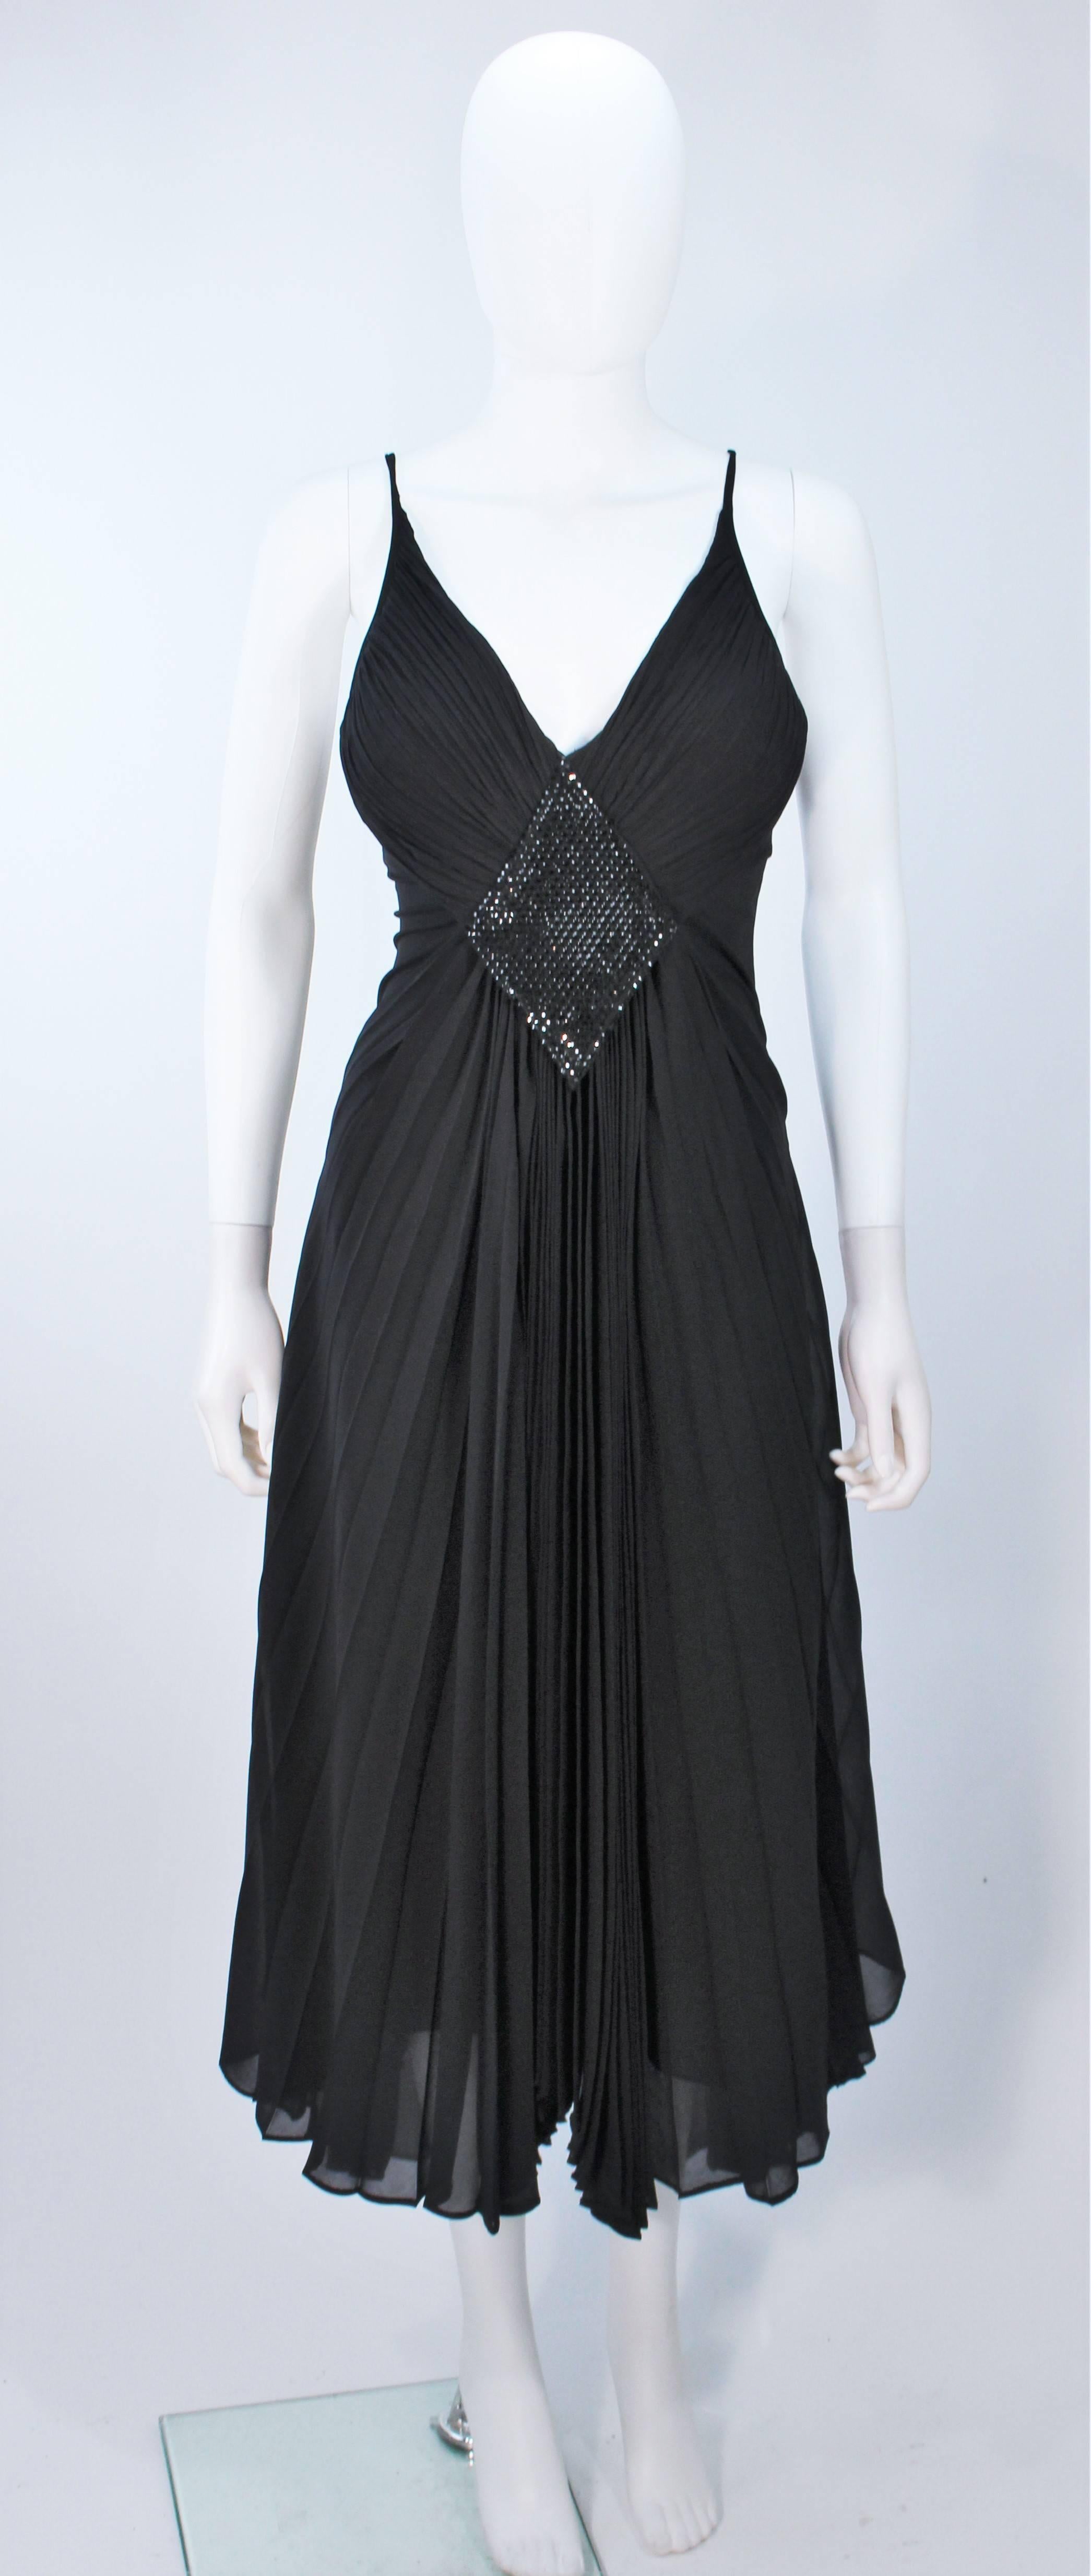  This Paco Rabanne dress is composed of a fine pleated silk jersey and features a center front rhinestone detail. There is a center back zipper closure, interior boning, and an attached bra. In excellent vintage condition. 

  **Please